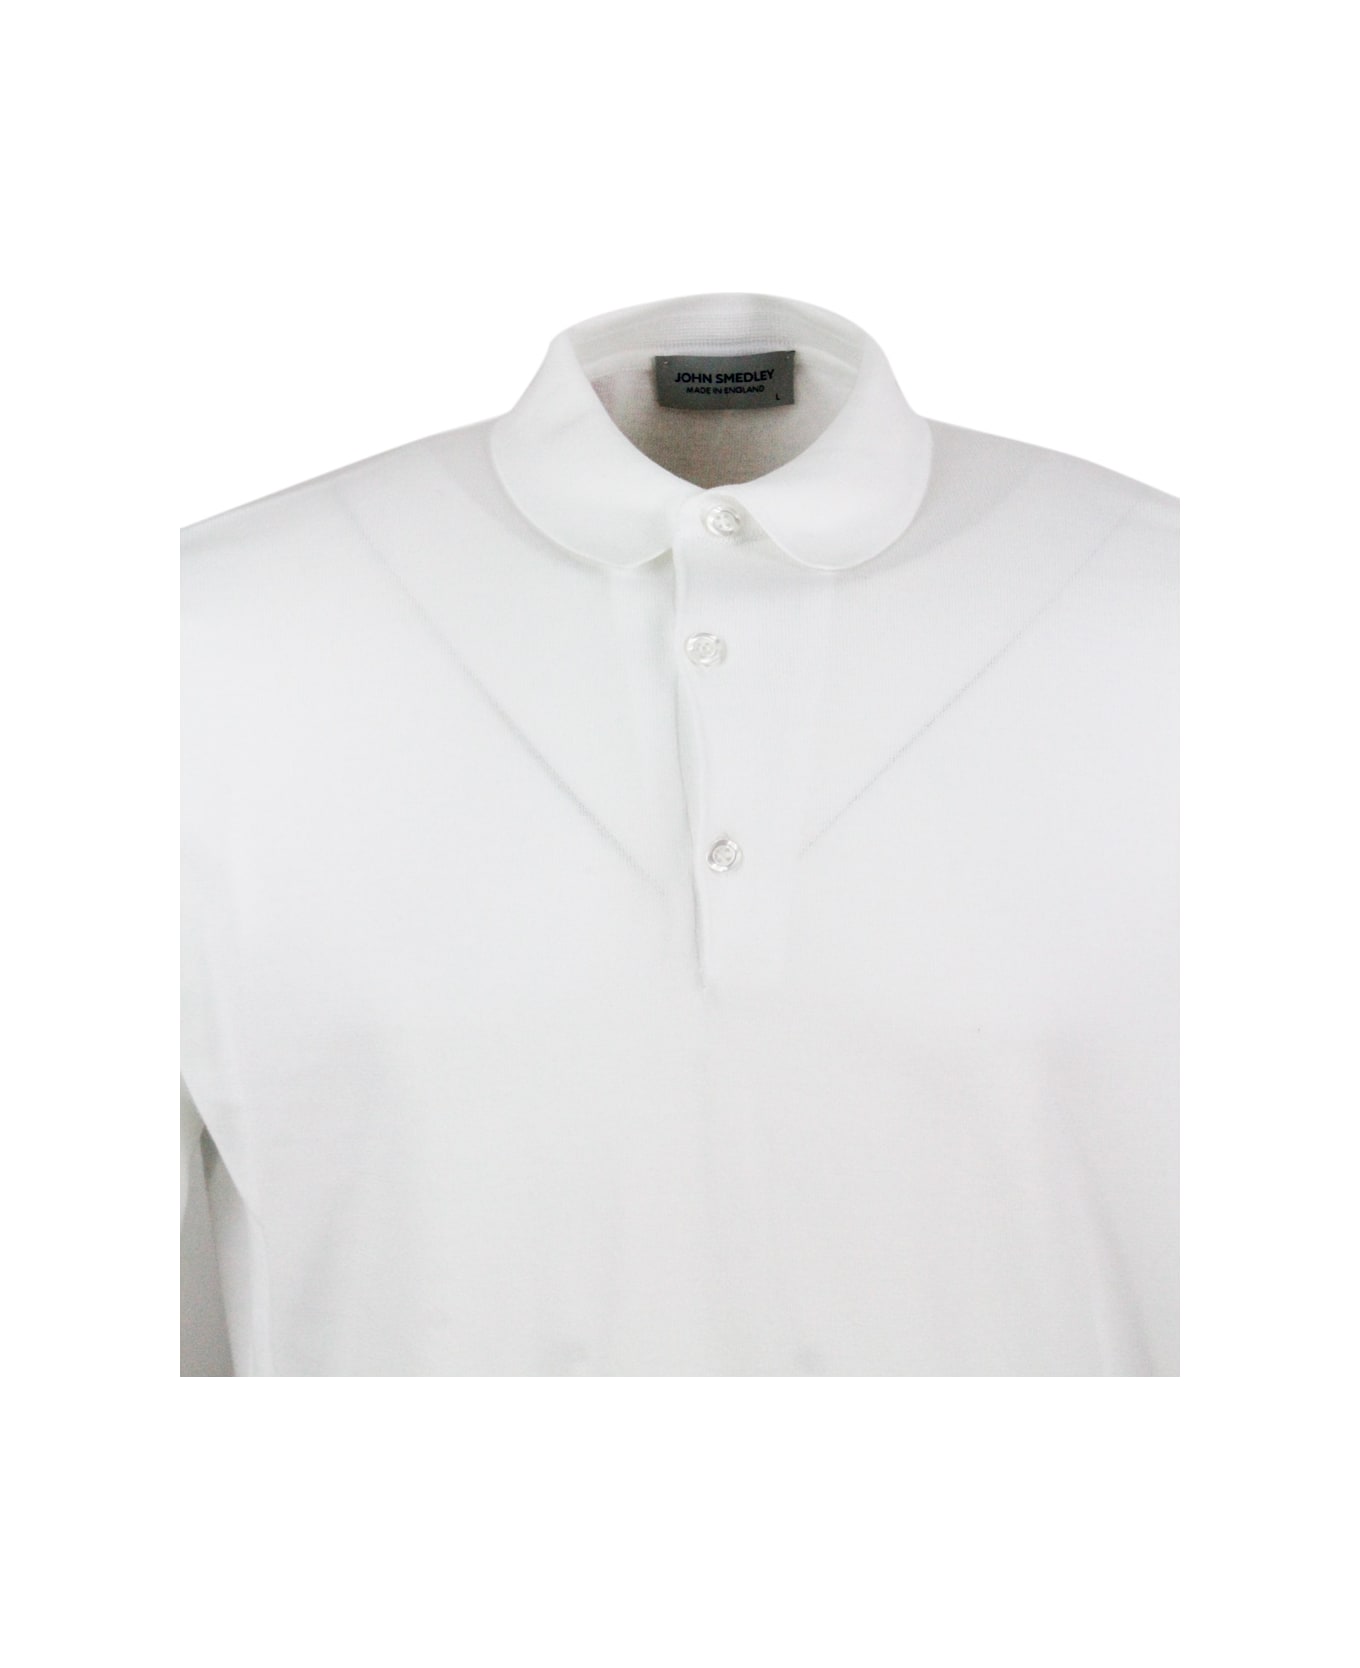 John Smedley Long-sleeved Polo Shirt In Extrafine Cotton Thread With Three Buttons - White